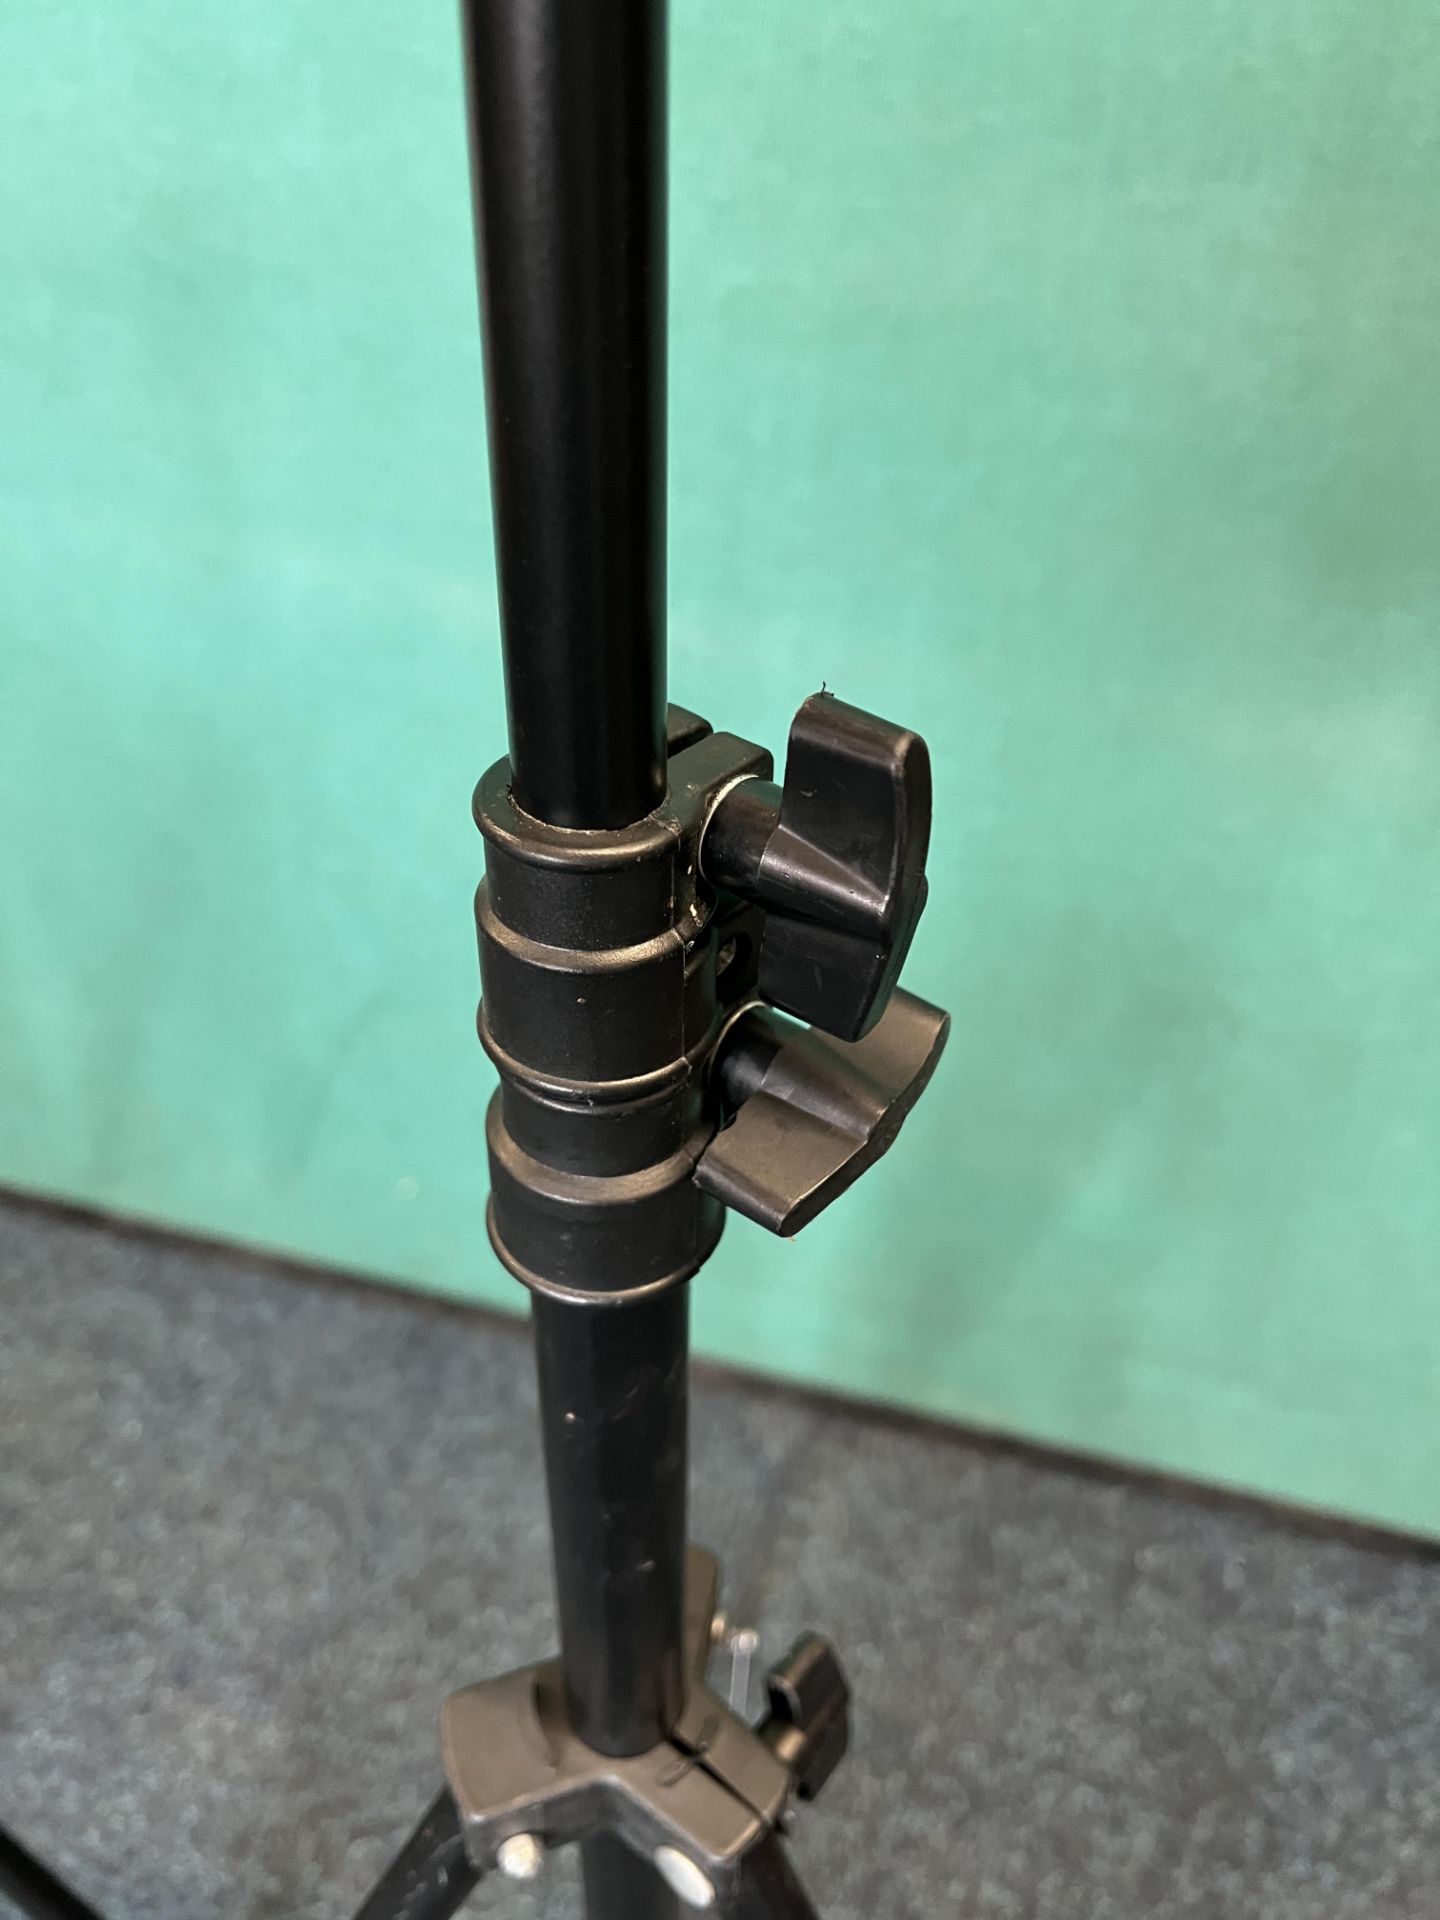 2 x Camera Tripods - As pictured - Image 4 of 6